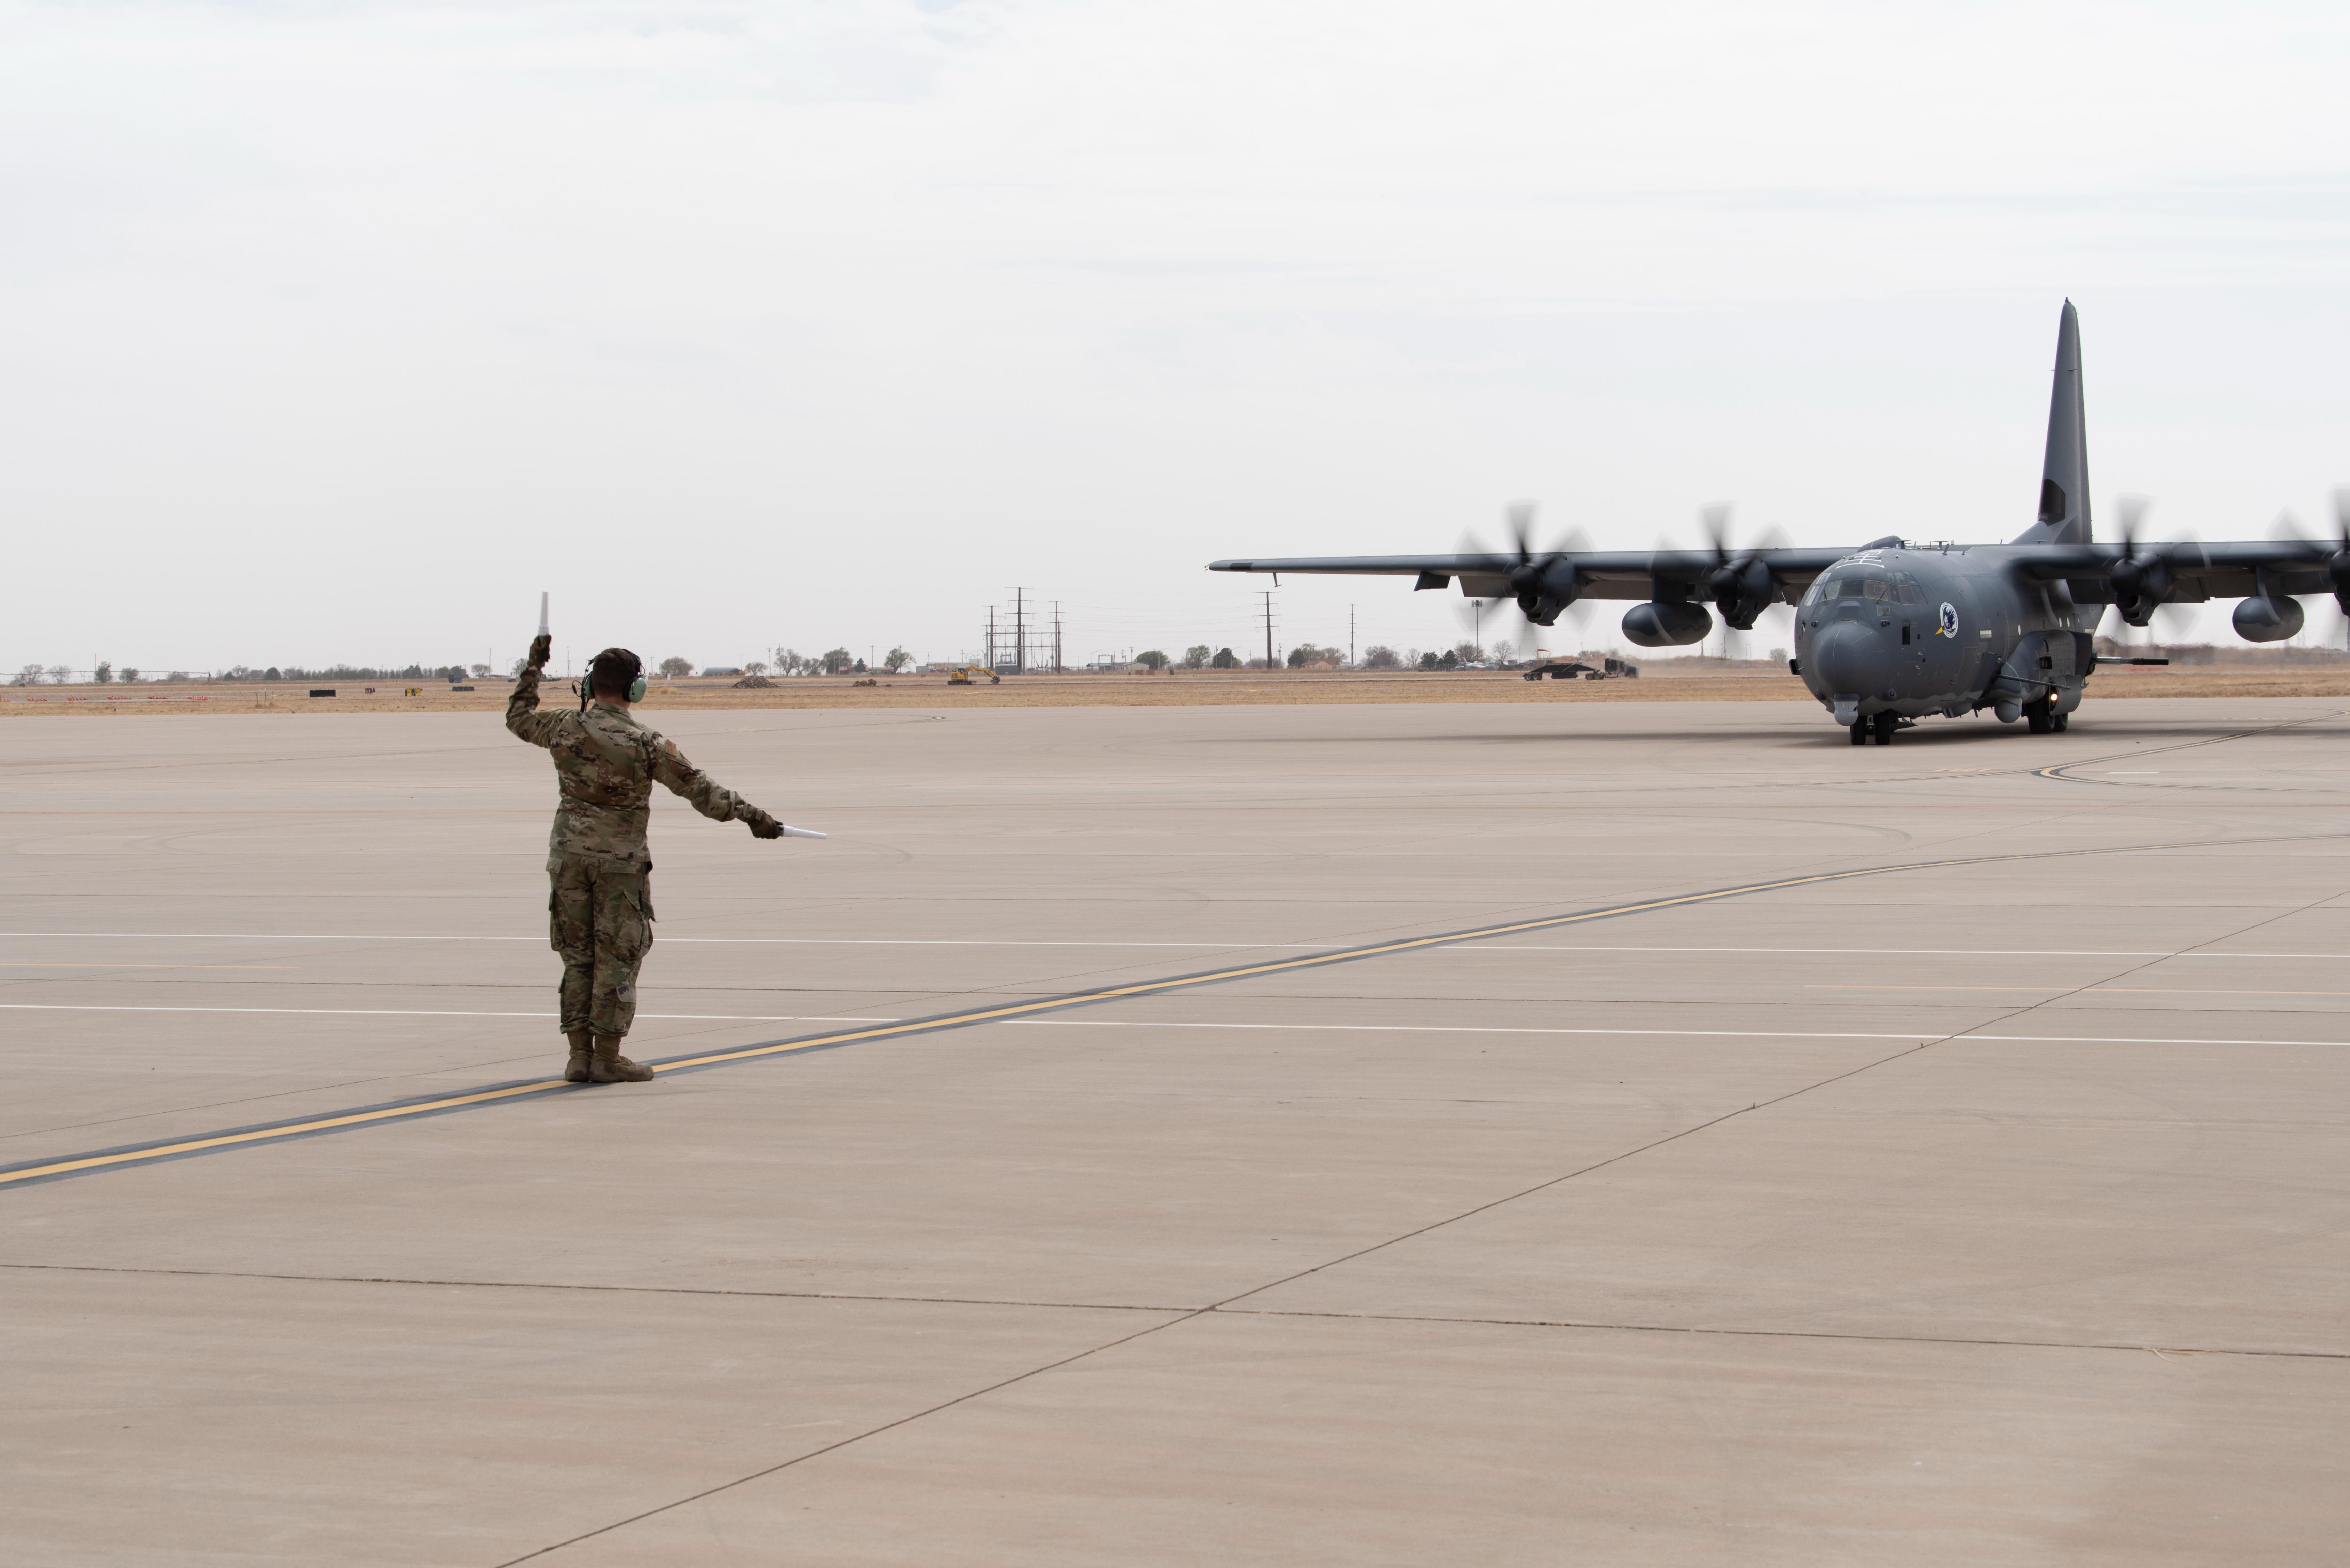 U.S. Air Force Airman 1st Class Jacob Sooter, 27th Special Operations Aircraft Maintenance Squadron crew chief, marshals the 16th Special Operations Squadrons first AC-130J Ghostrider aircraft at Cannon Air Force Base